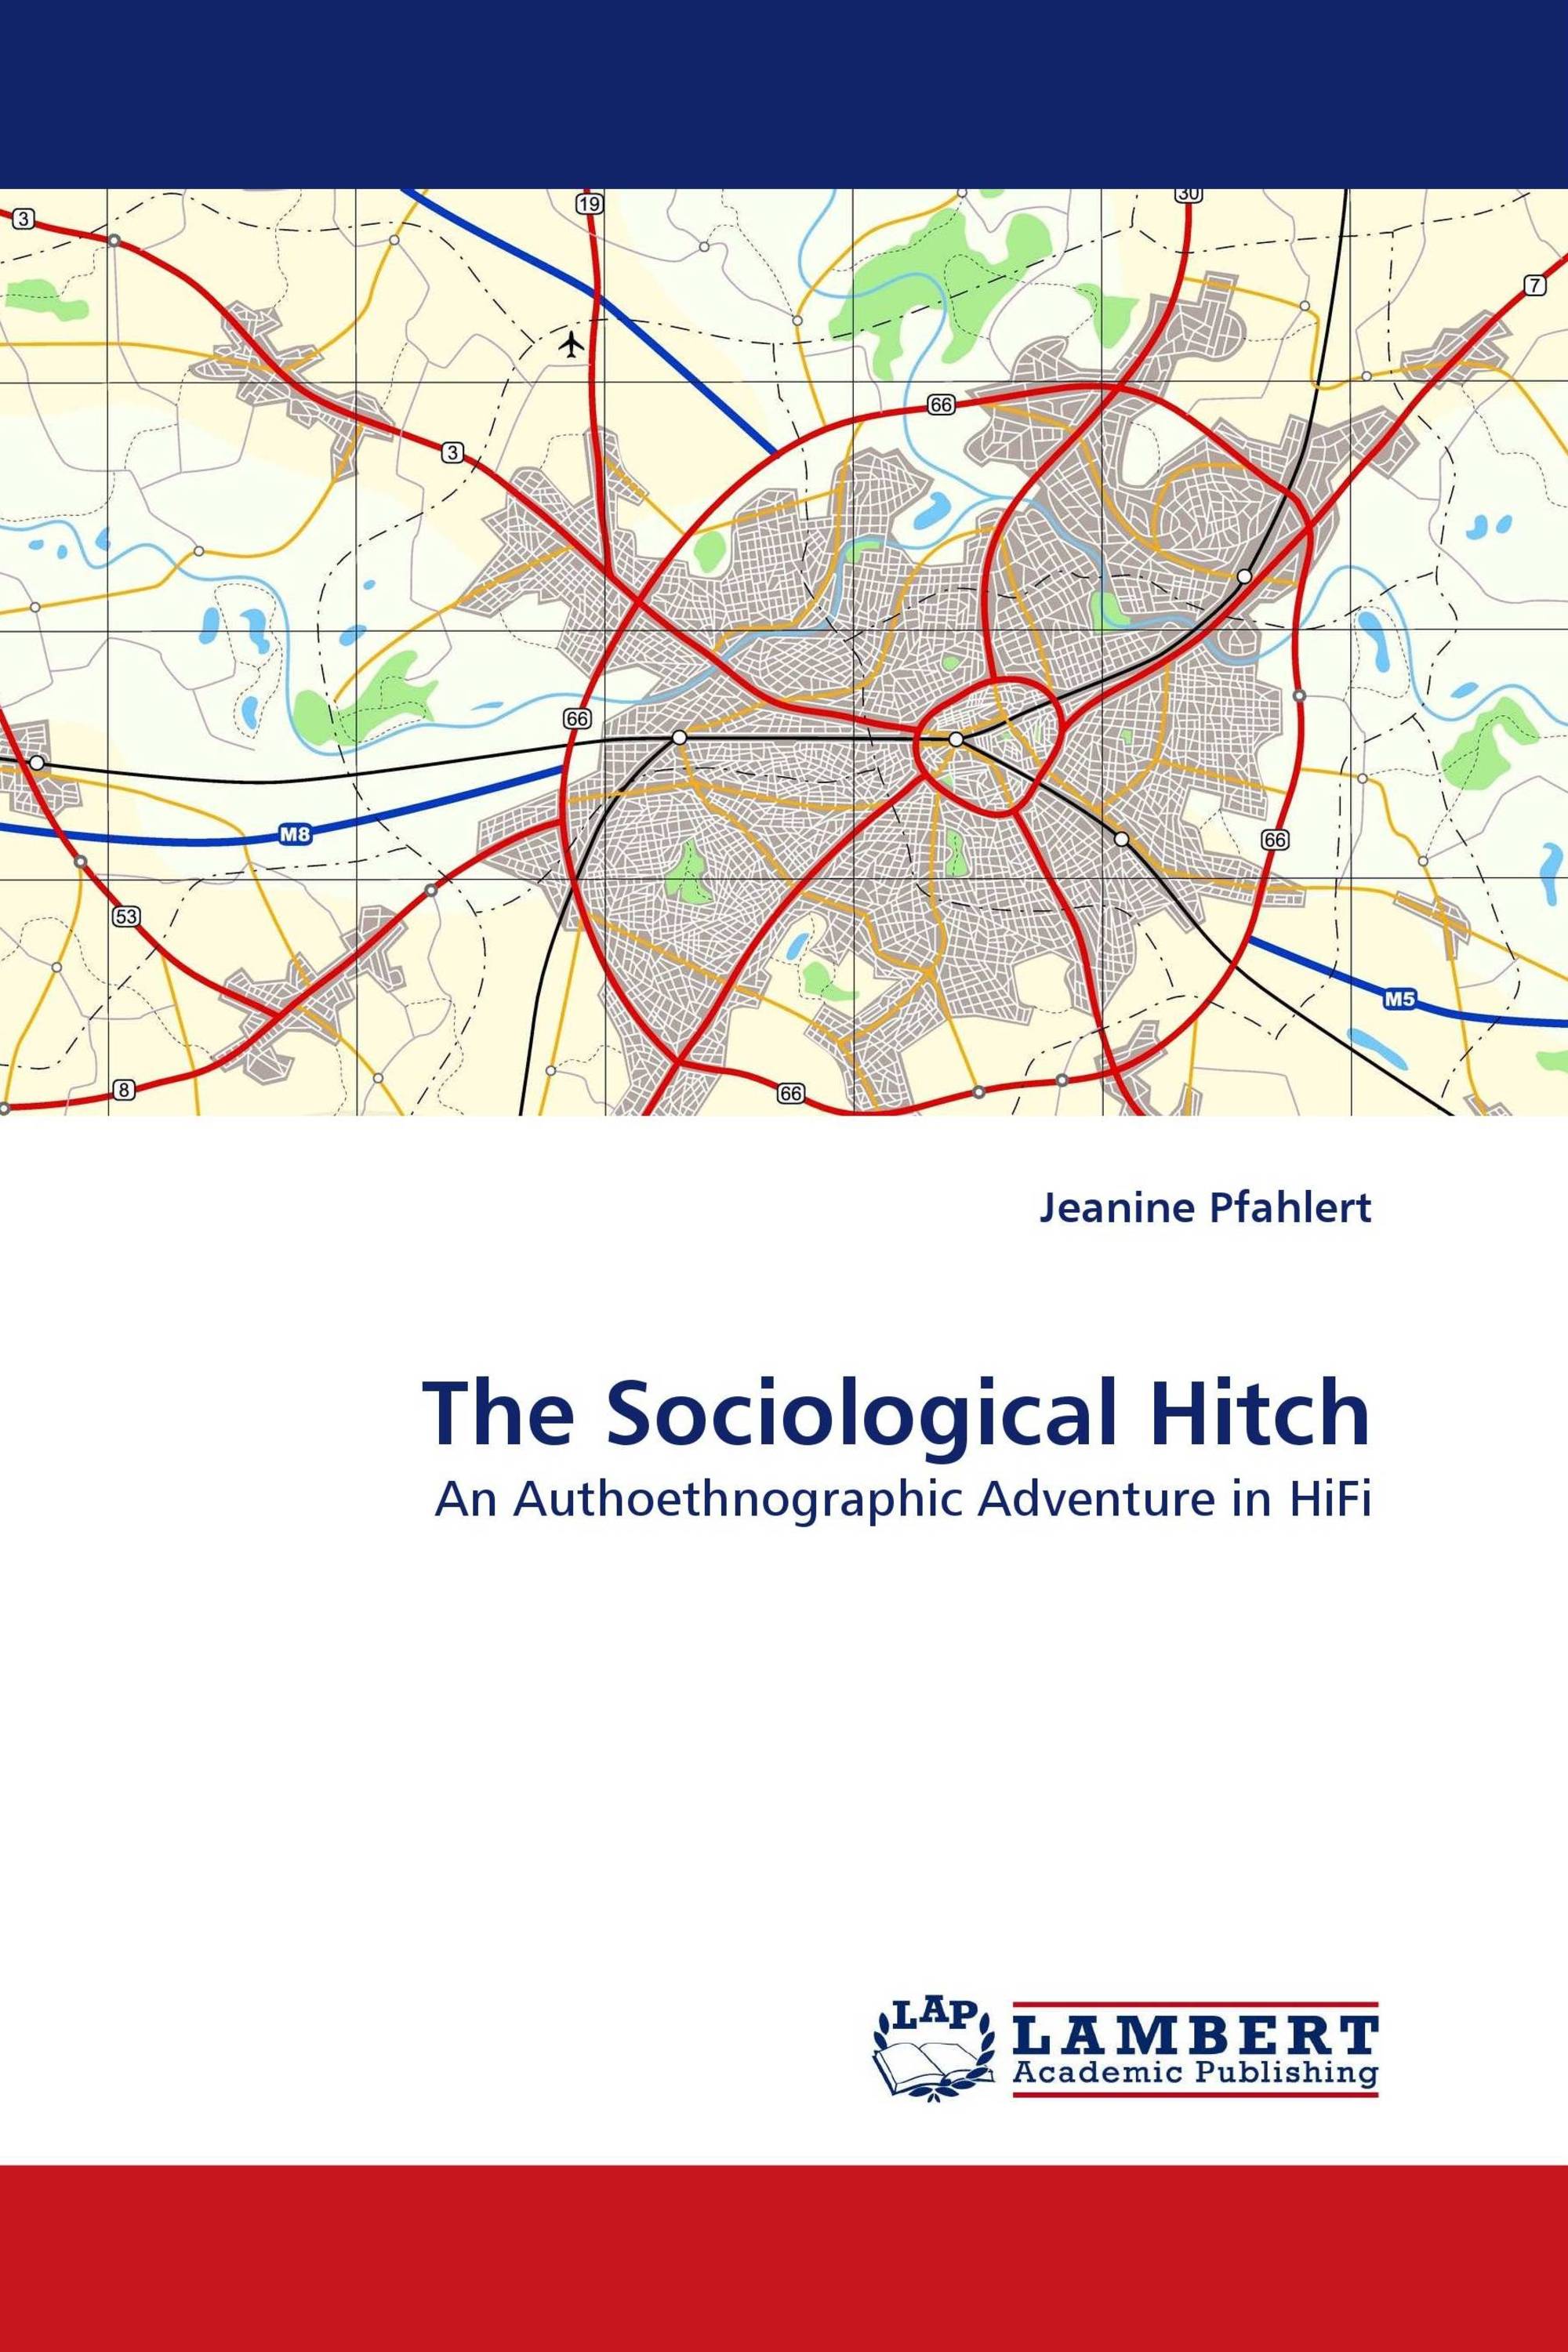 The Sociological Hitch